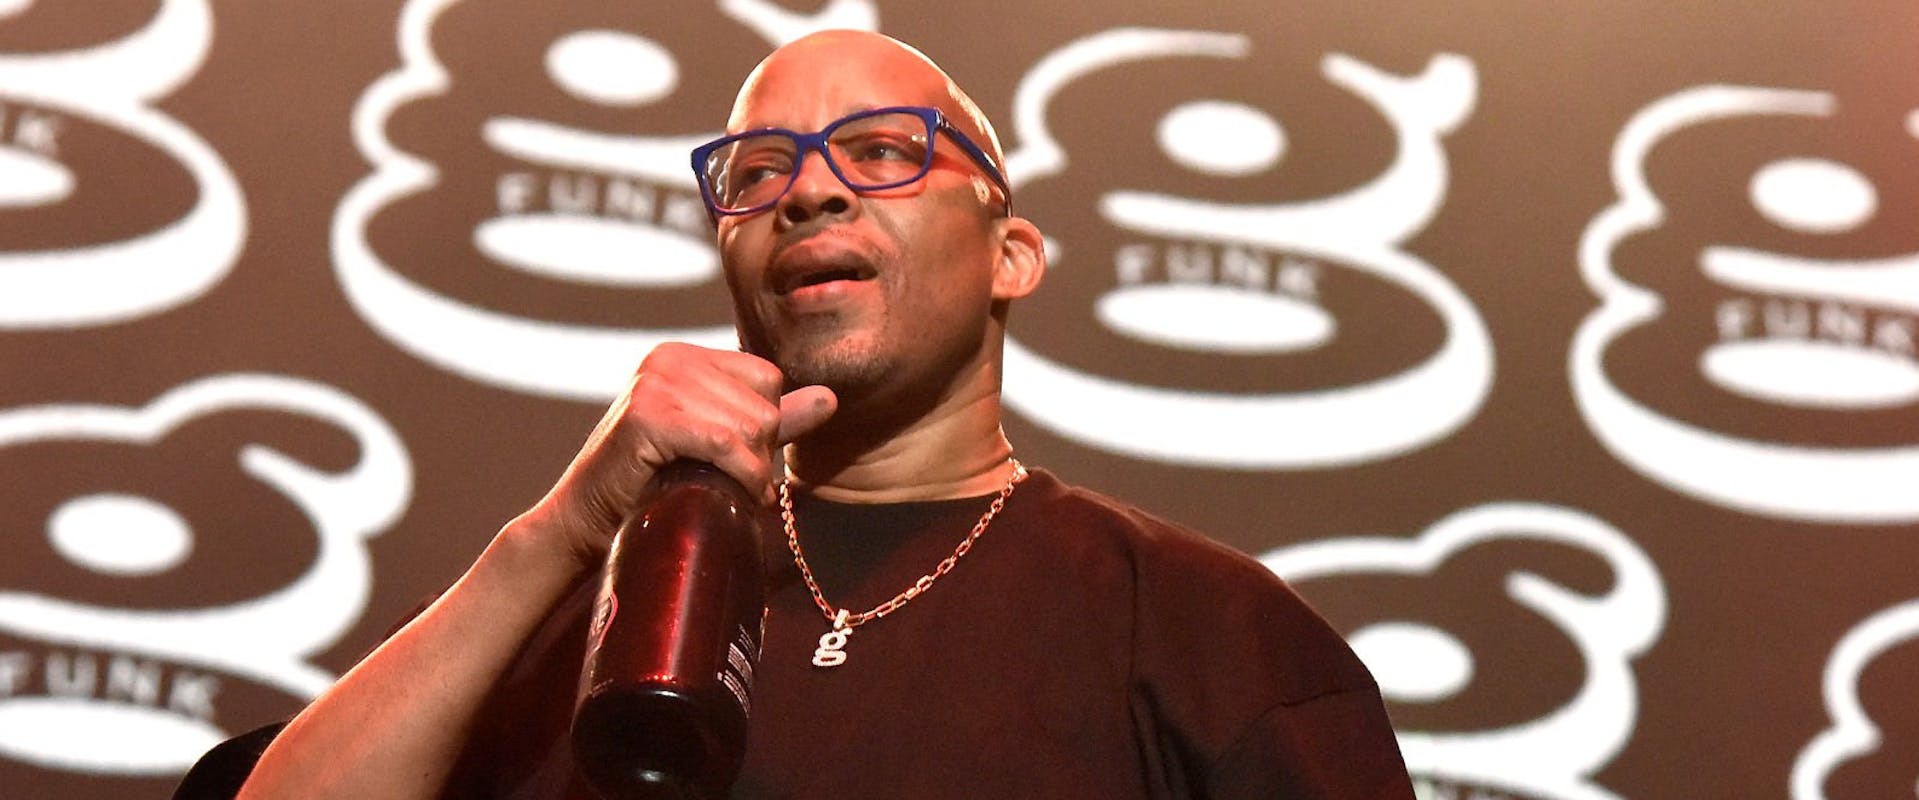 Warren G Turned Down 2Pac Collab Because of Suge Knight Altercation